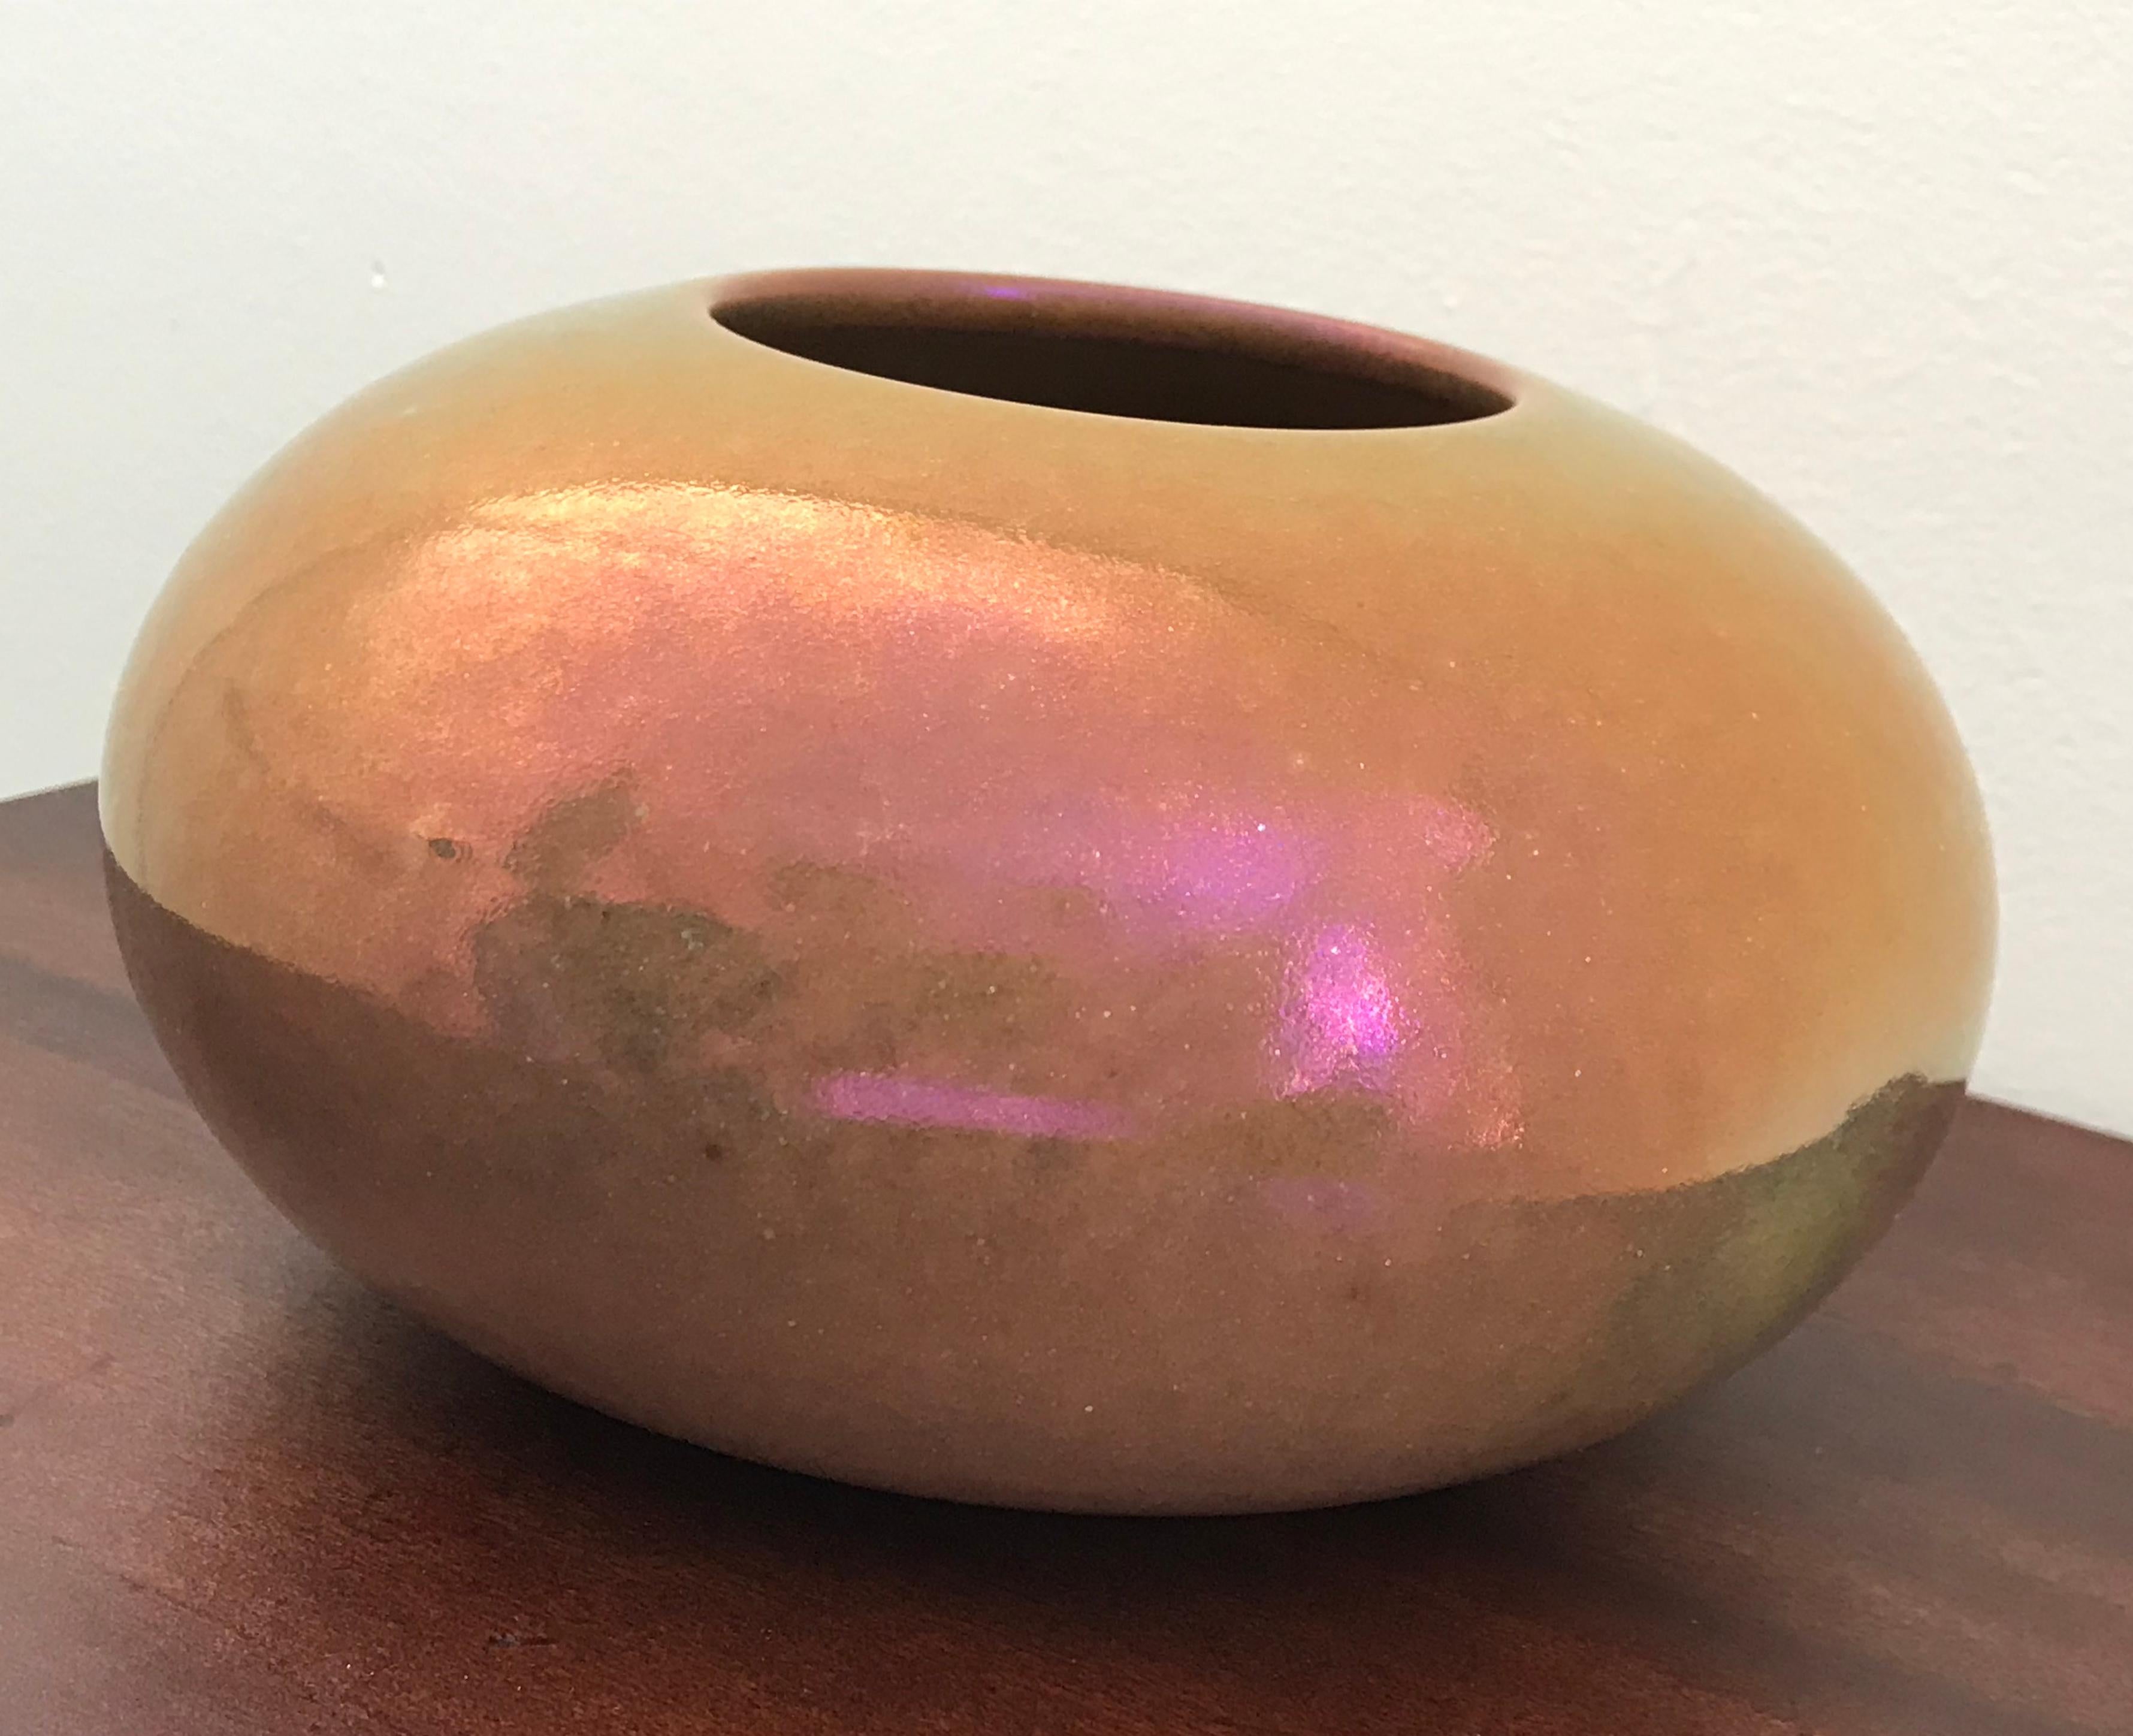 Iridescent glazed ceramic vase in copper color by Mobach, Netherlands. The Mobach family has been producing kiln fired ceramics for over five generations.